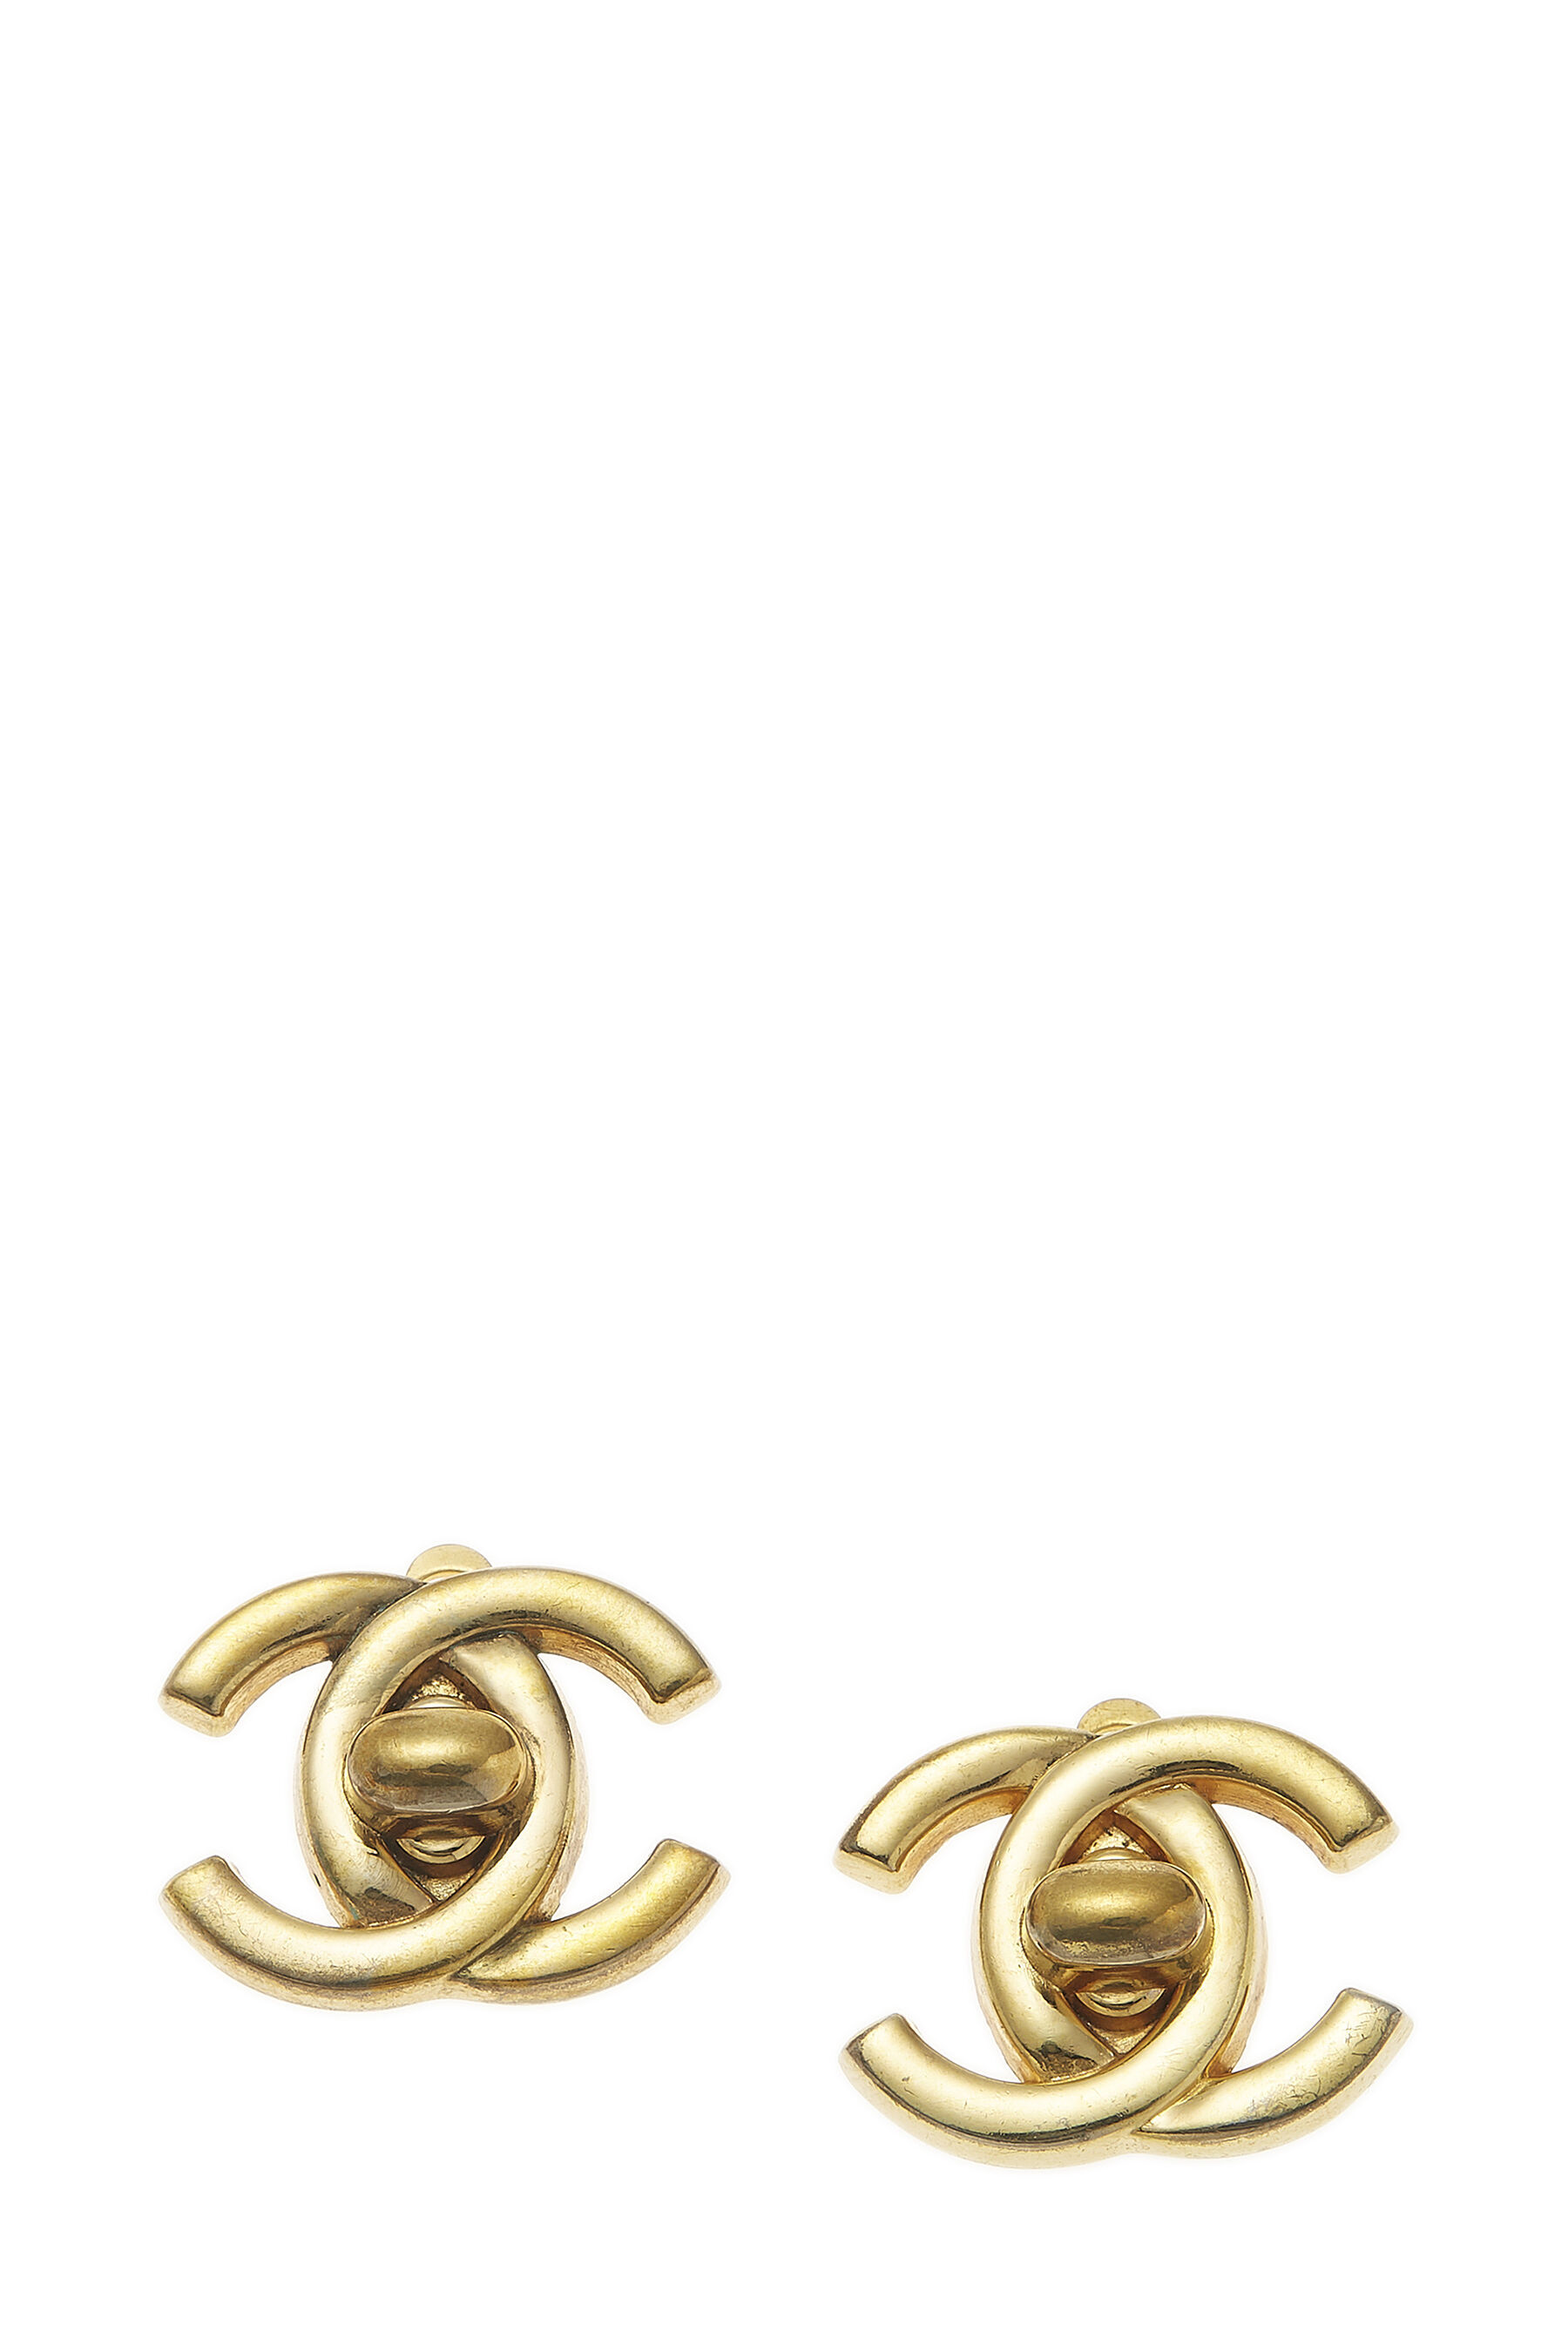 Chanel Double C Rose Gold And Diamond Earrings  electricmallcomng